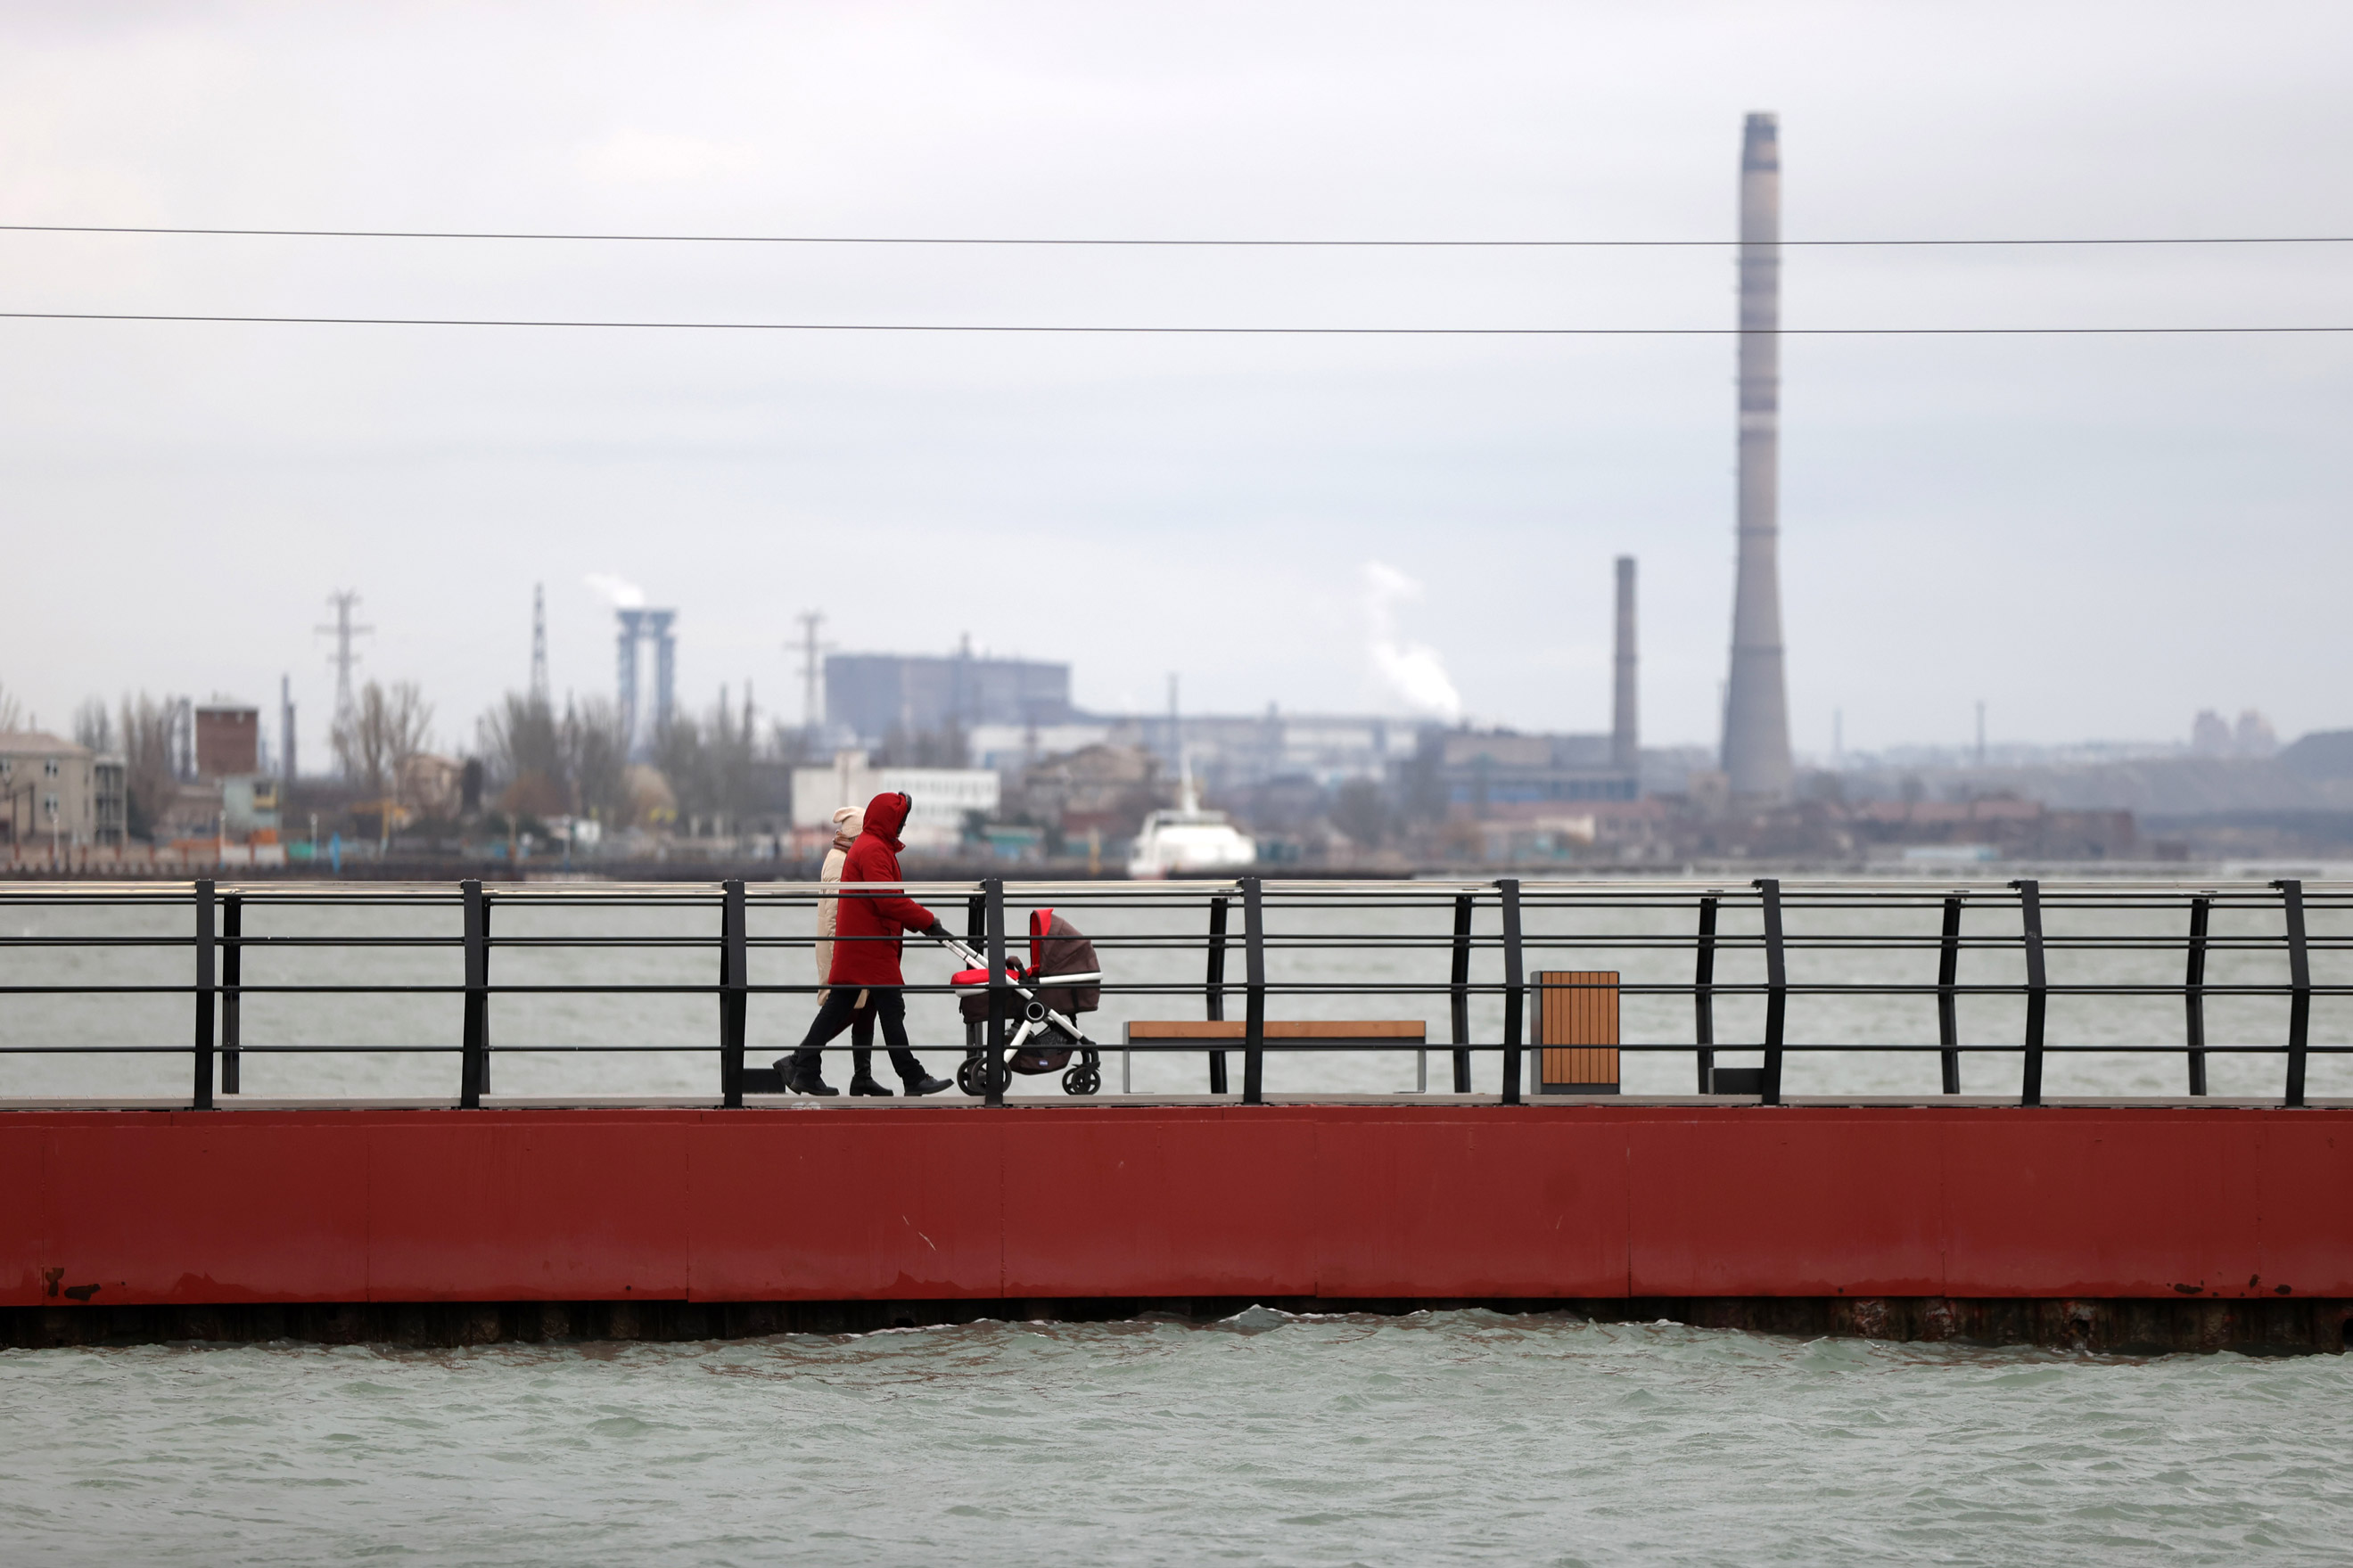 A couple push a pram along a pier with industrial buildings in the background